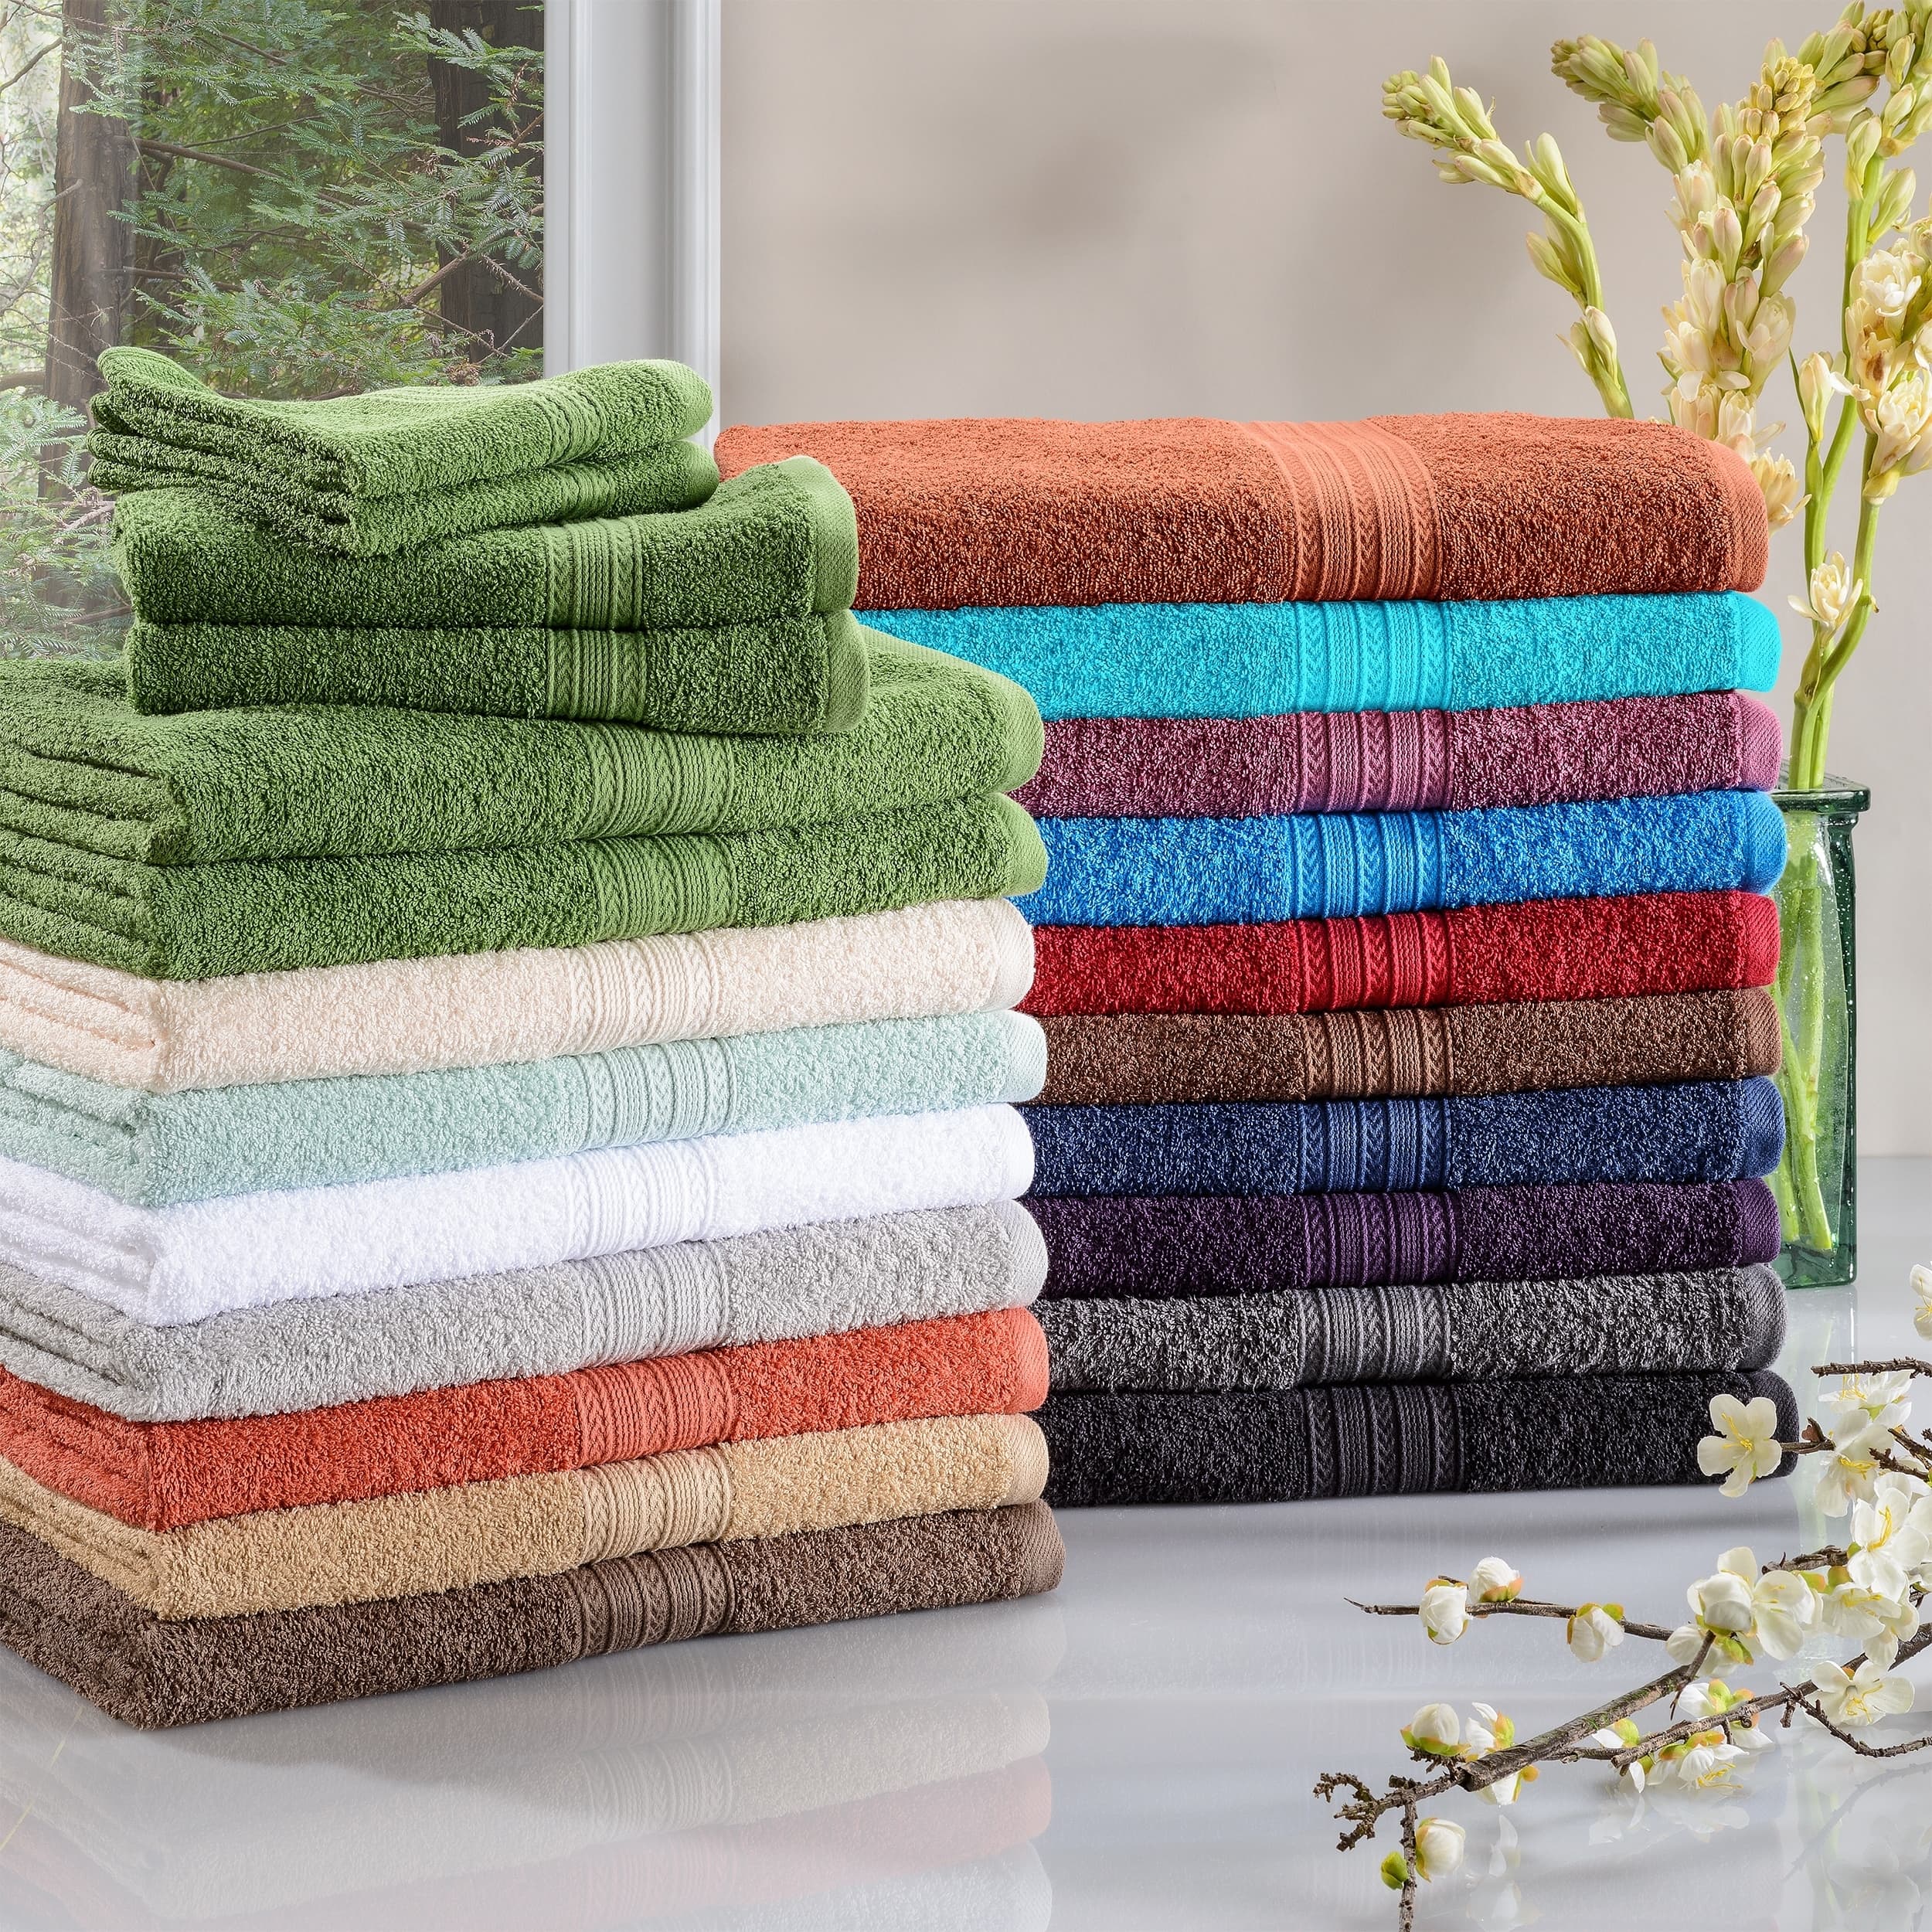 Buy Bath Towels Online at Overstock | Our Best Towels Deals